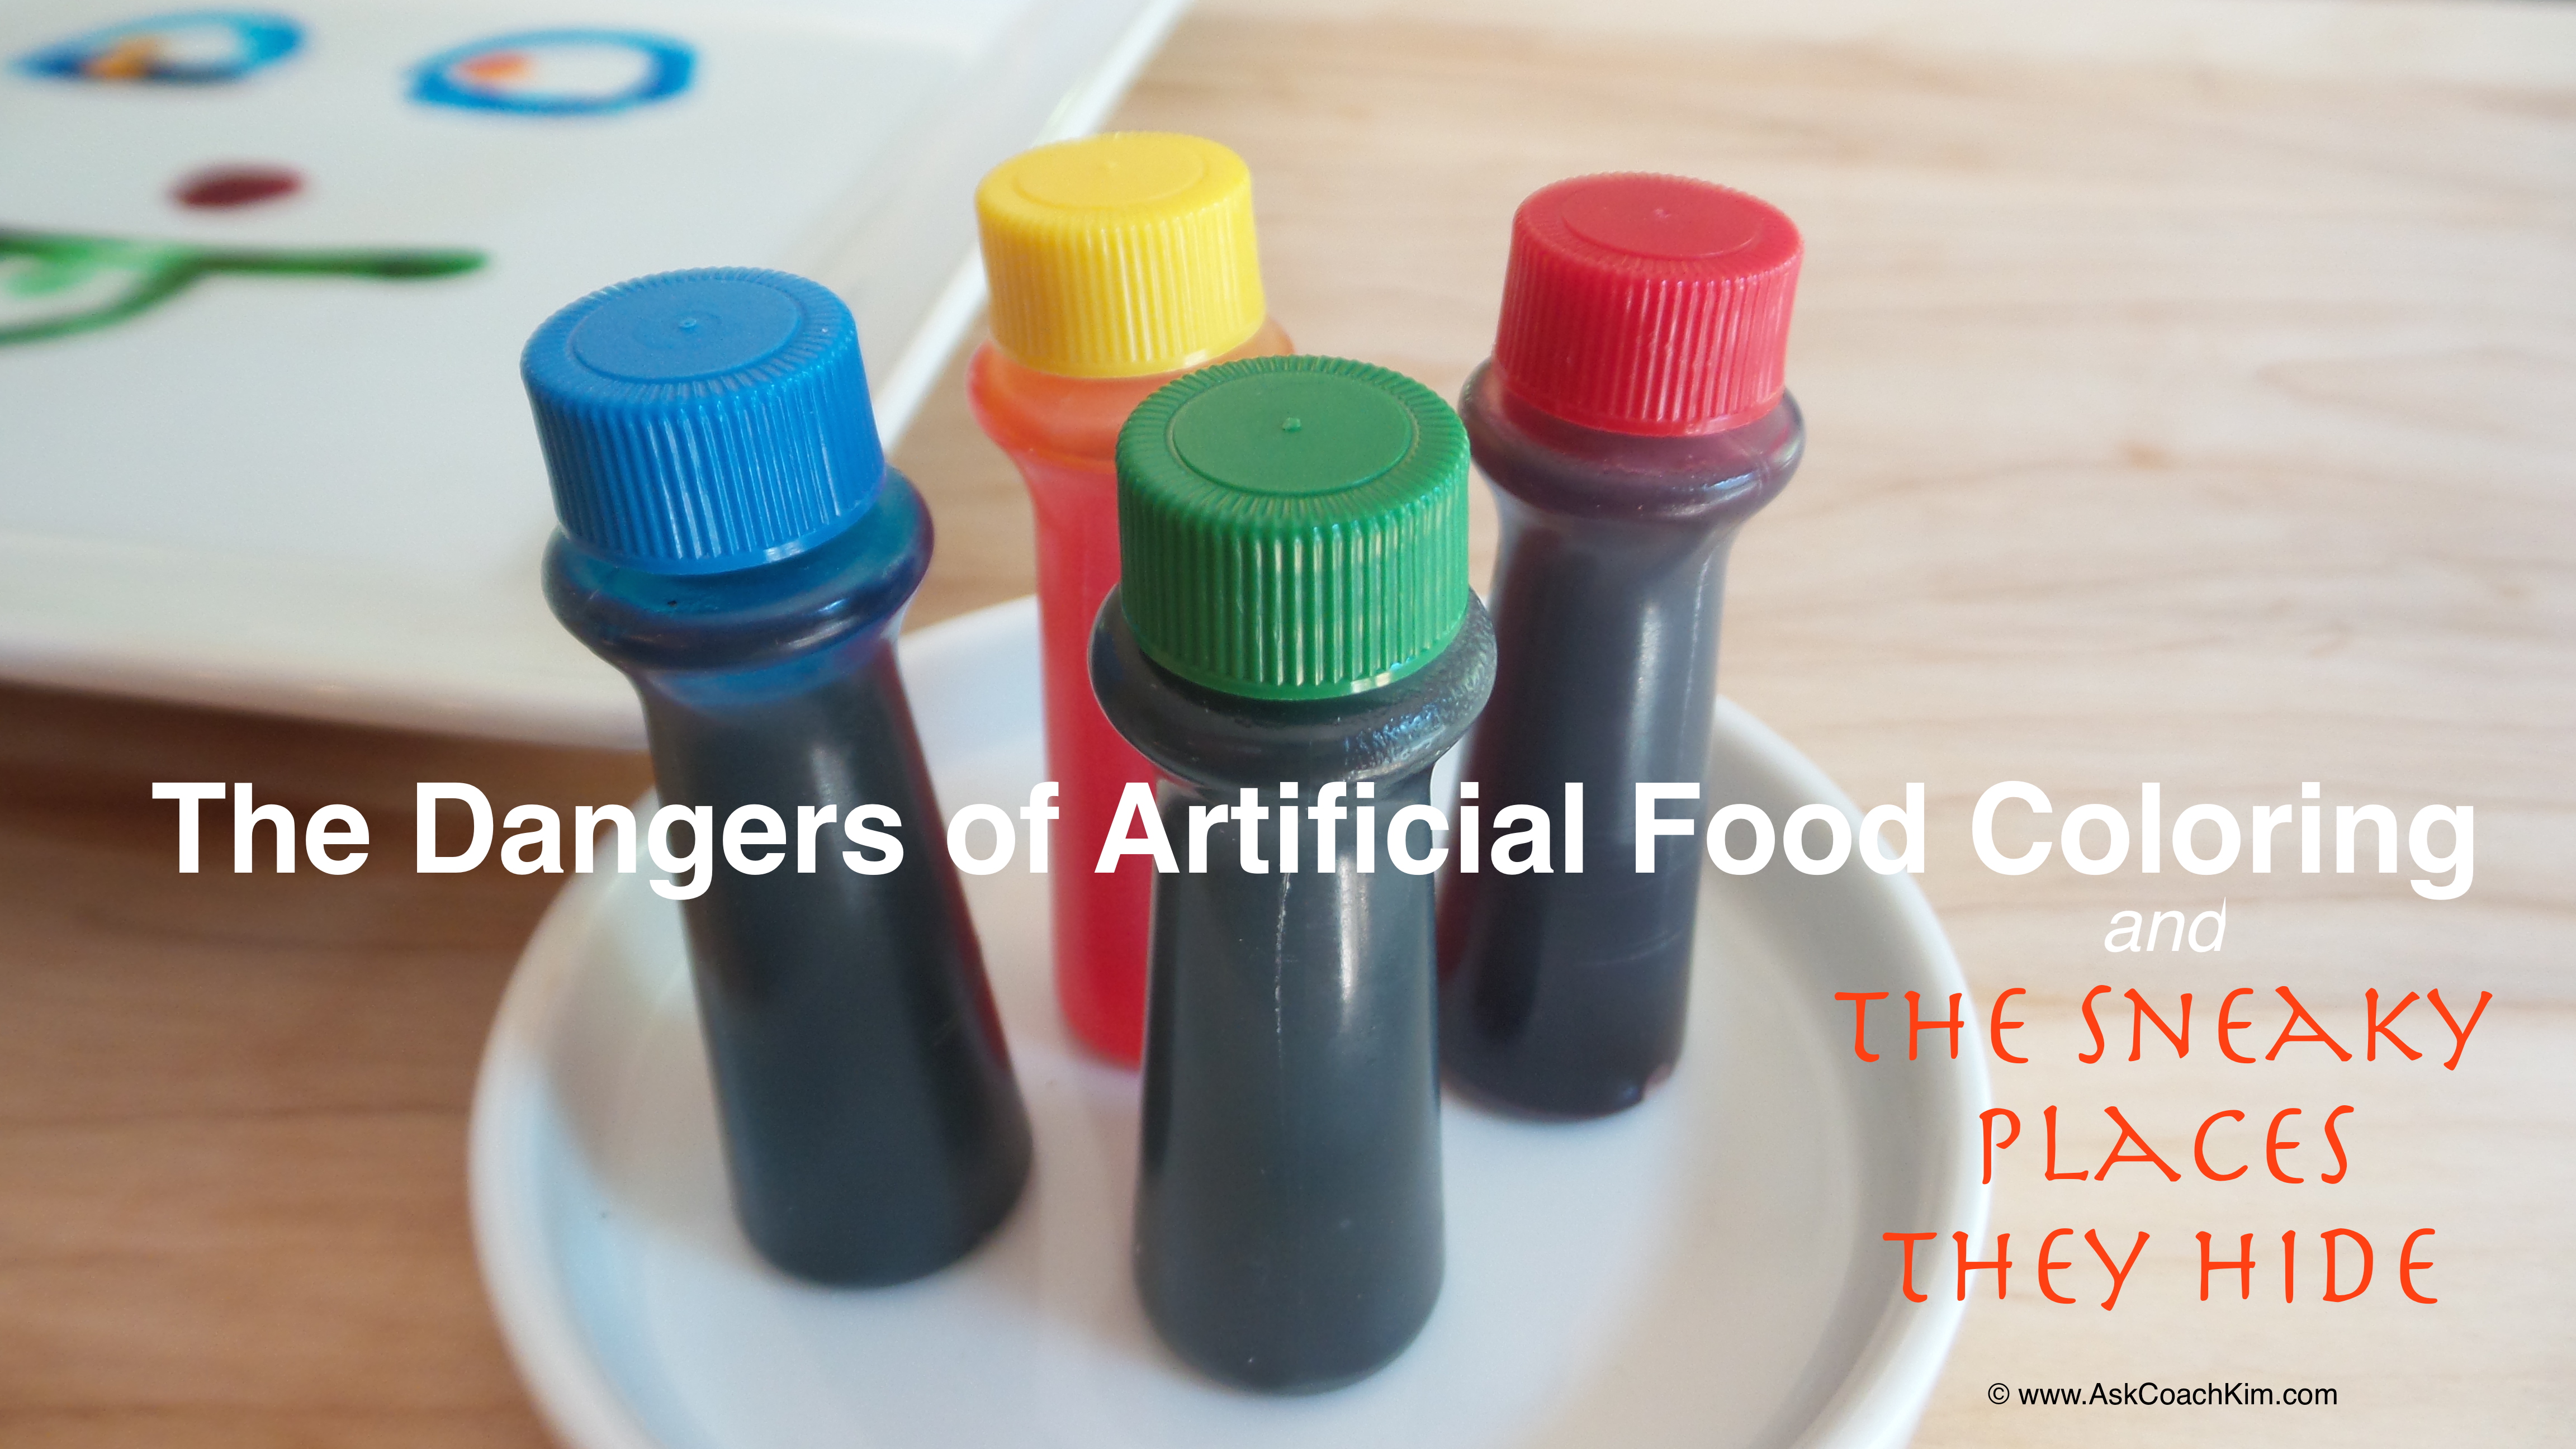 The Dangers of Artificial Food Coloring and Sneaky Places They Hide